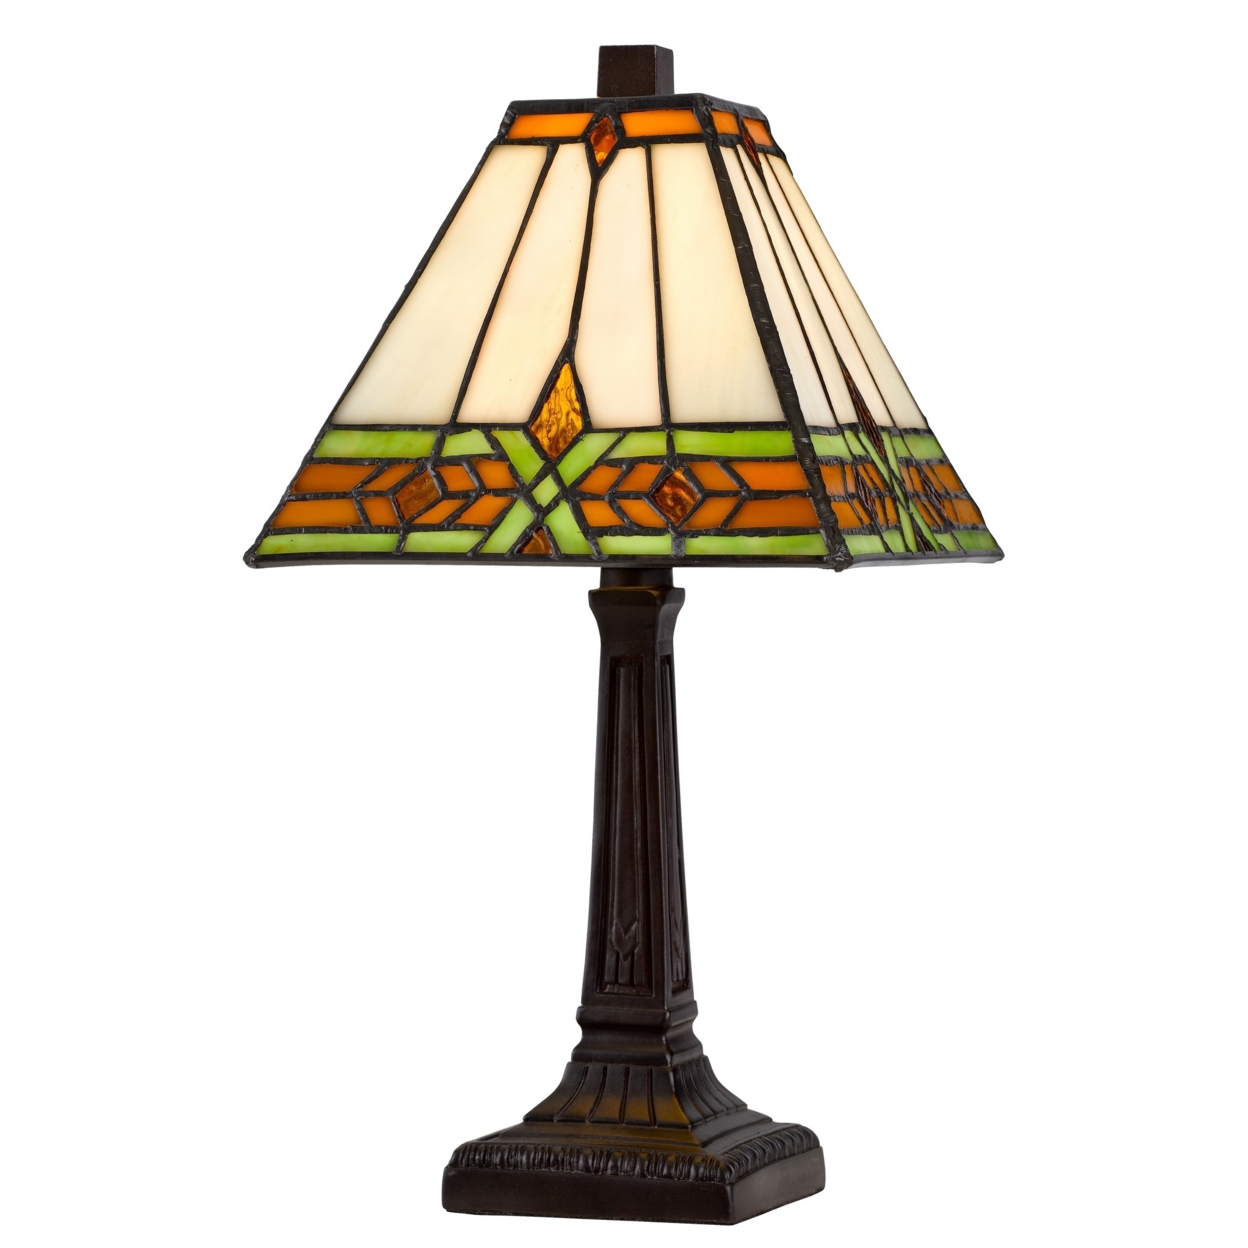 Eli 14 Inch Accent Lamp, Stained Square Tiffany Style Shade, Bronze Frame- Saltoro Sherpi